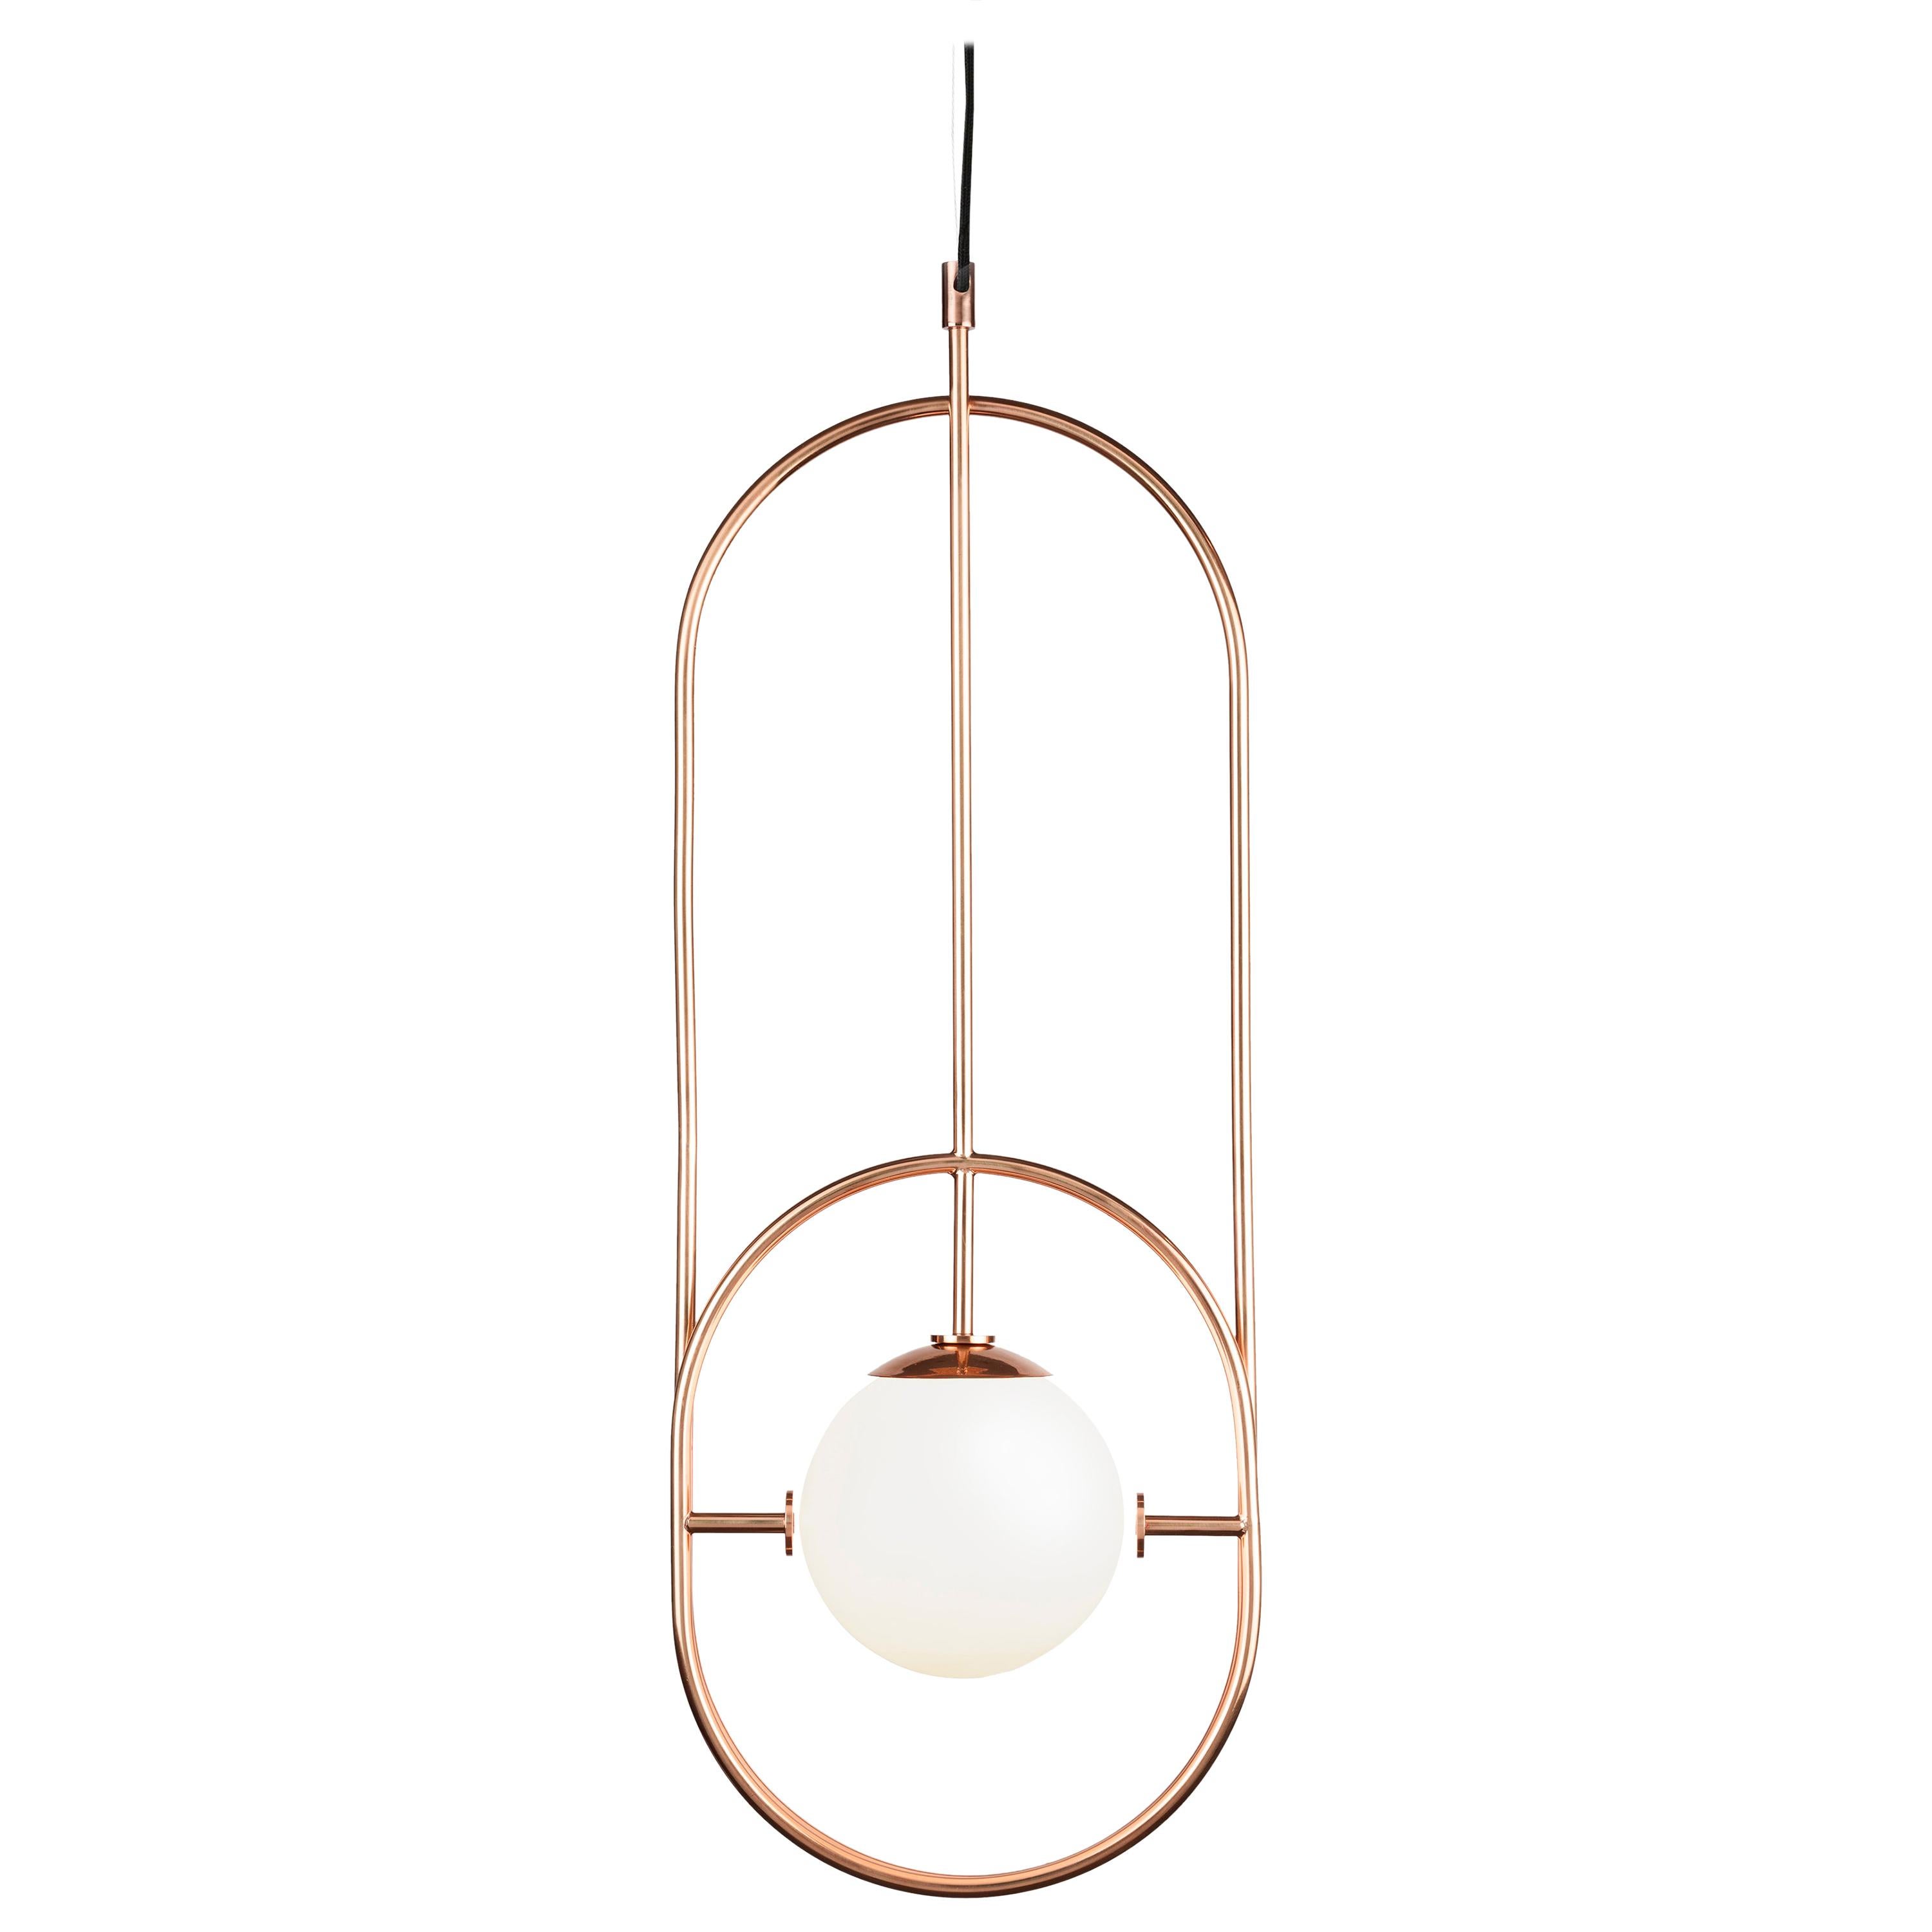 Art Deco inspired Loop I Pendant Lamp in Polished Brass Frosted Glass Handmade For Sale 2